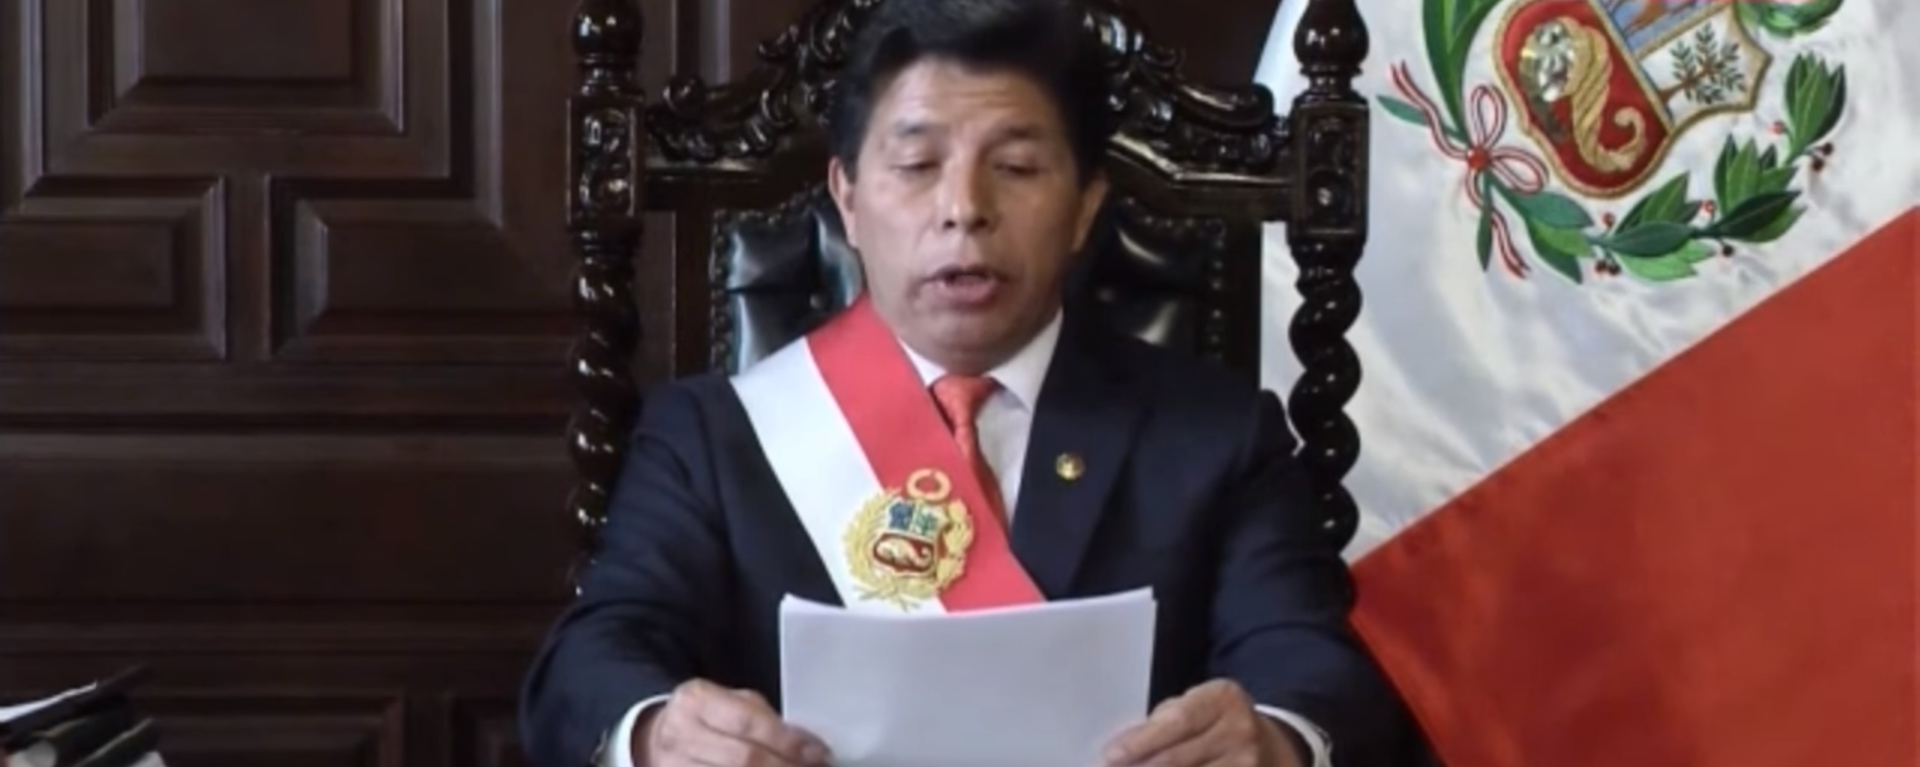 Peruvian President Pedro Castillo announced on state television on December 7, 2022, the immediate dissolution of the Congress and the imposition of decree law until new elections can be organized. - Sputnik International, 1920, 16.12.2022